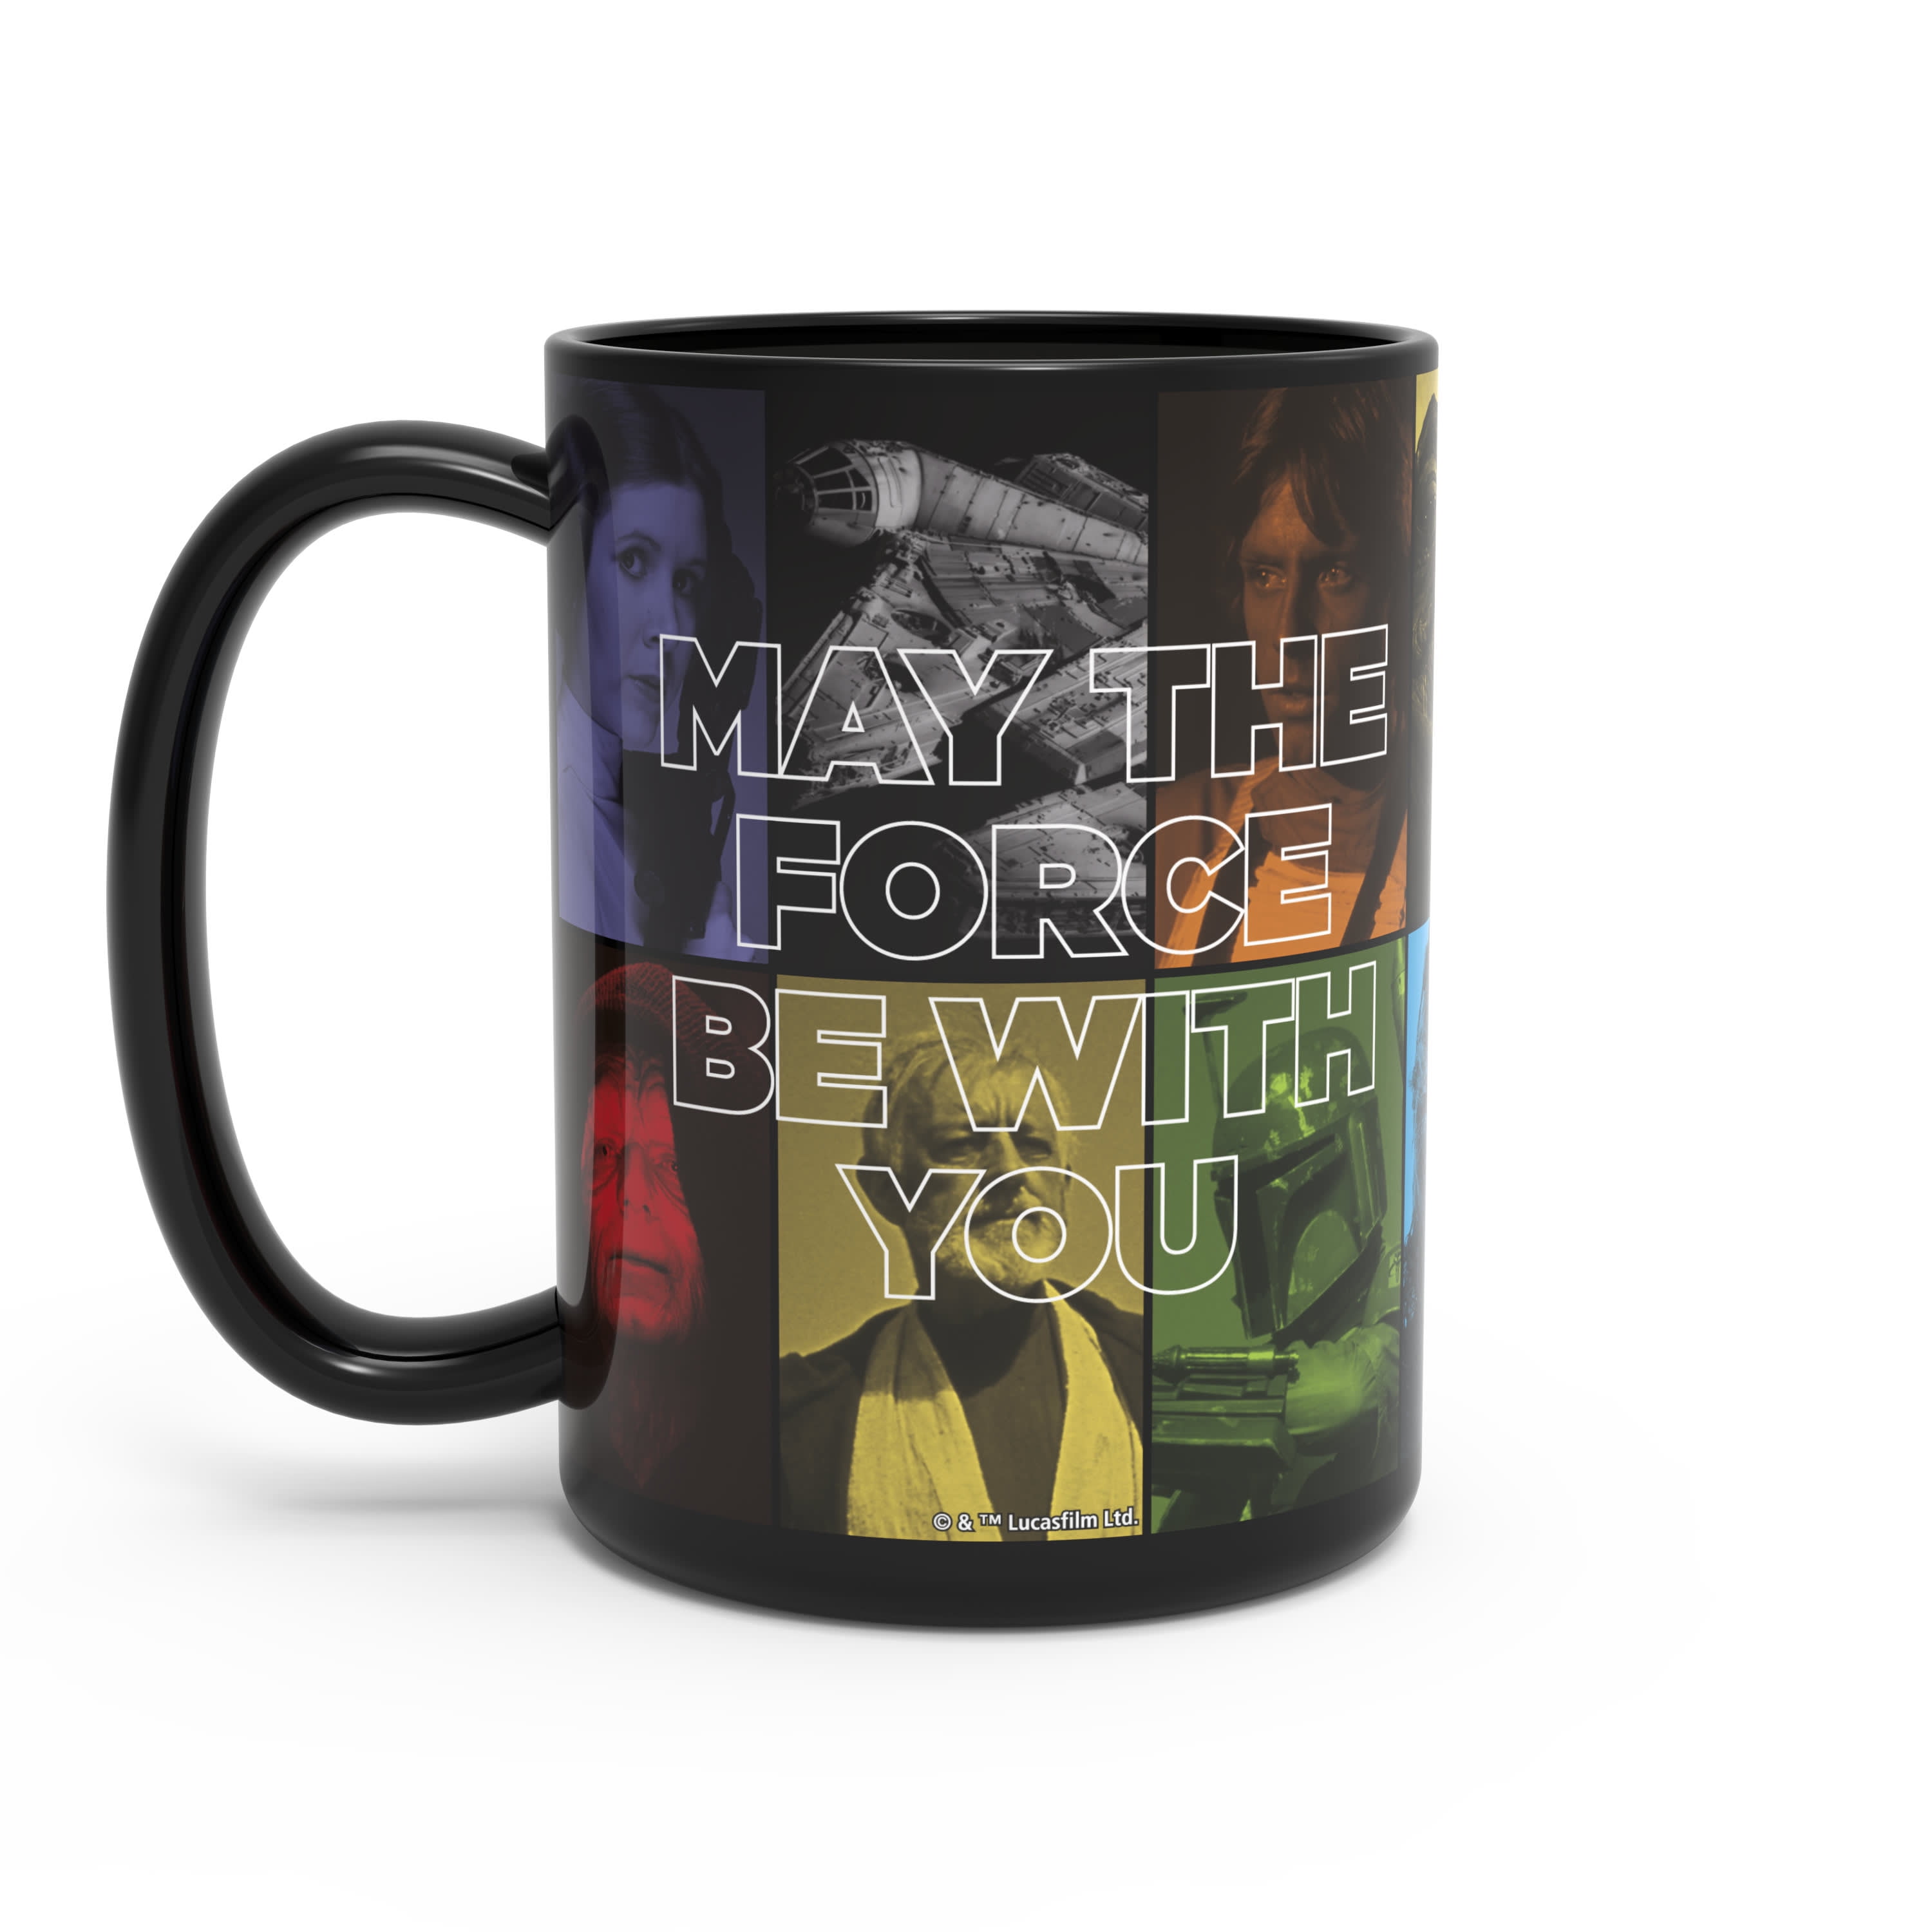 Let Your Fandom Shine with New Color Changing Mugs from Zak! Design